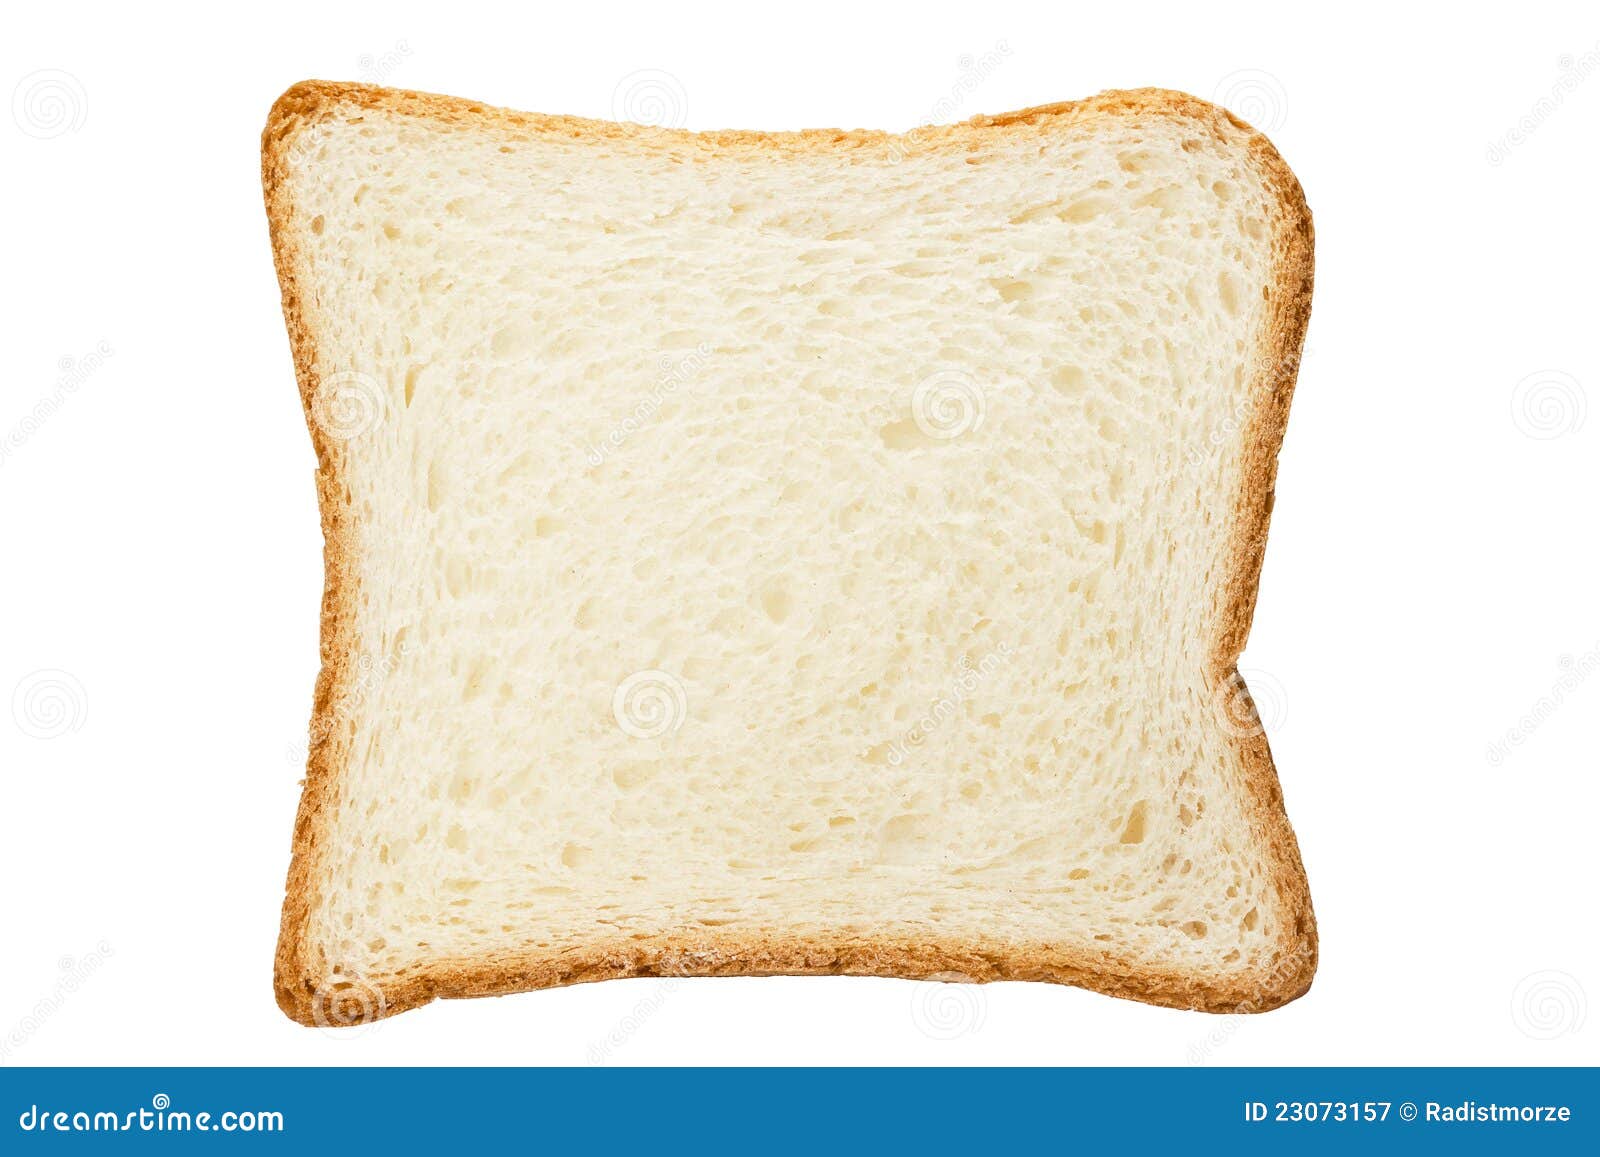 White Toast Bread Royalty Free Stock Photography - Image: 23073157